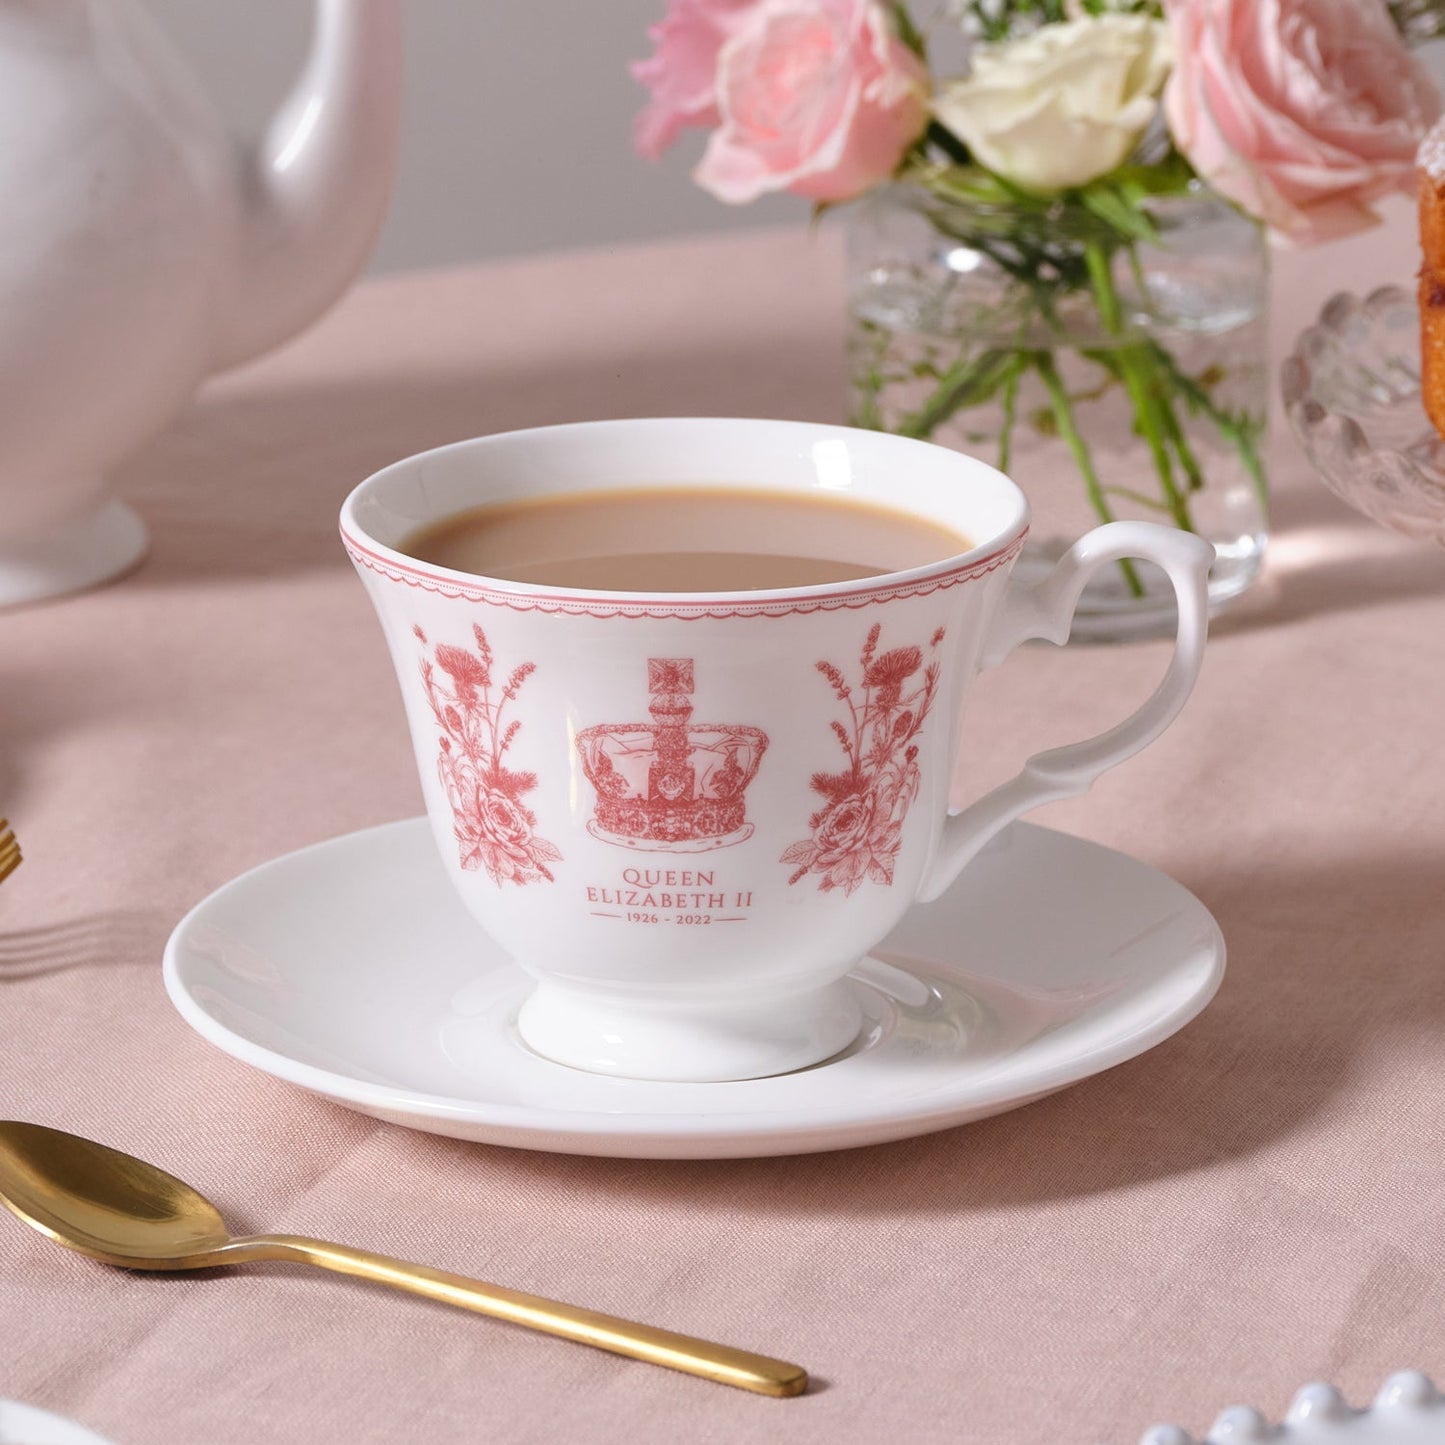 Queen Elizabeth II Commemorative and King Charles III Coronation Cup and Saucer Set